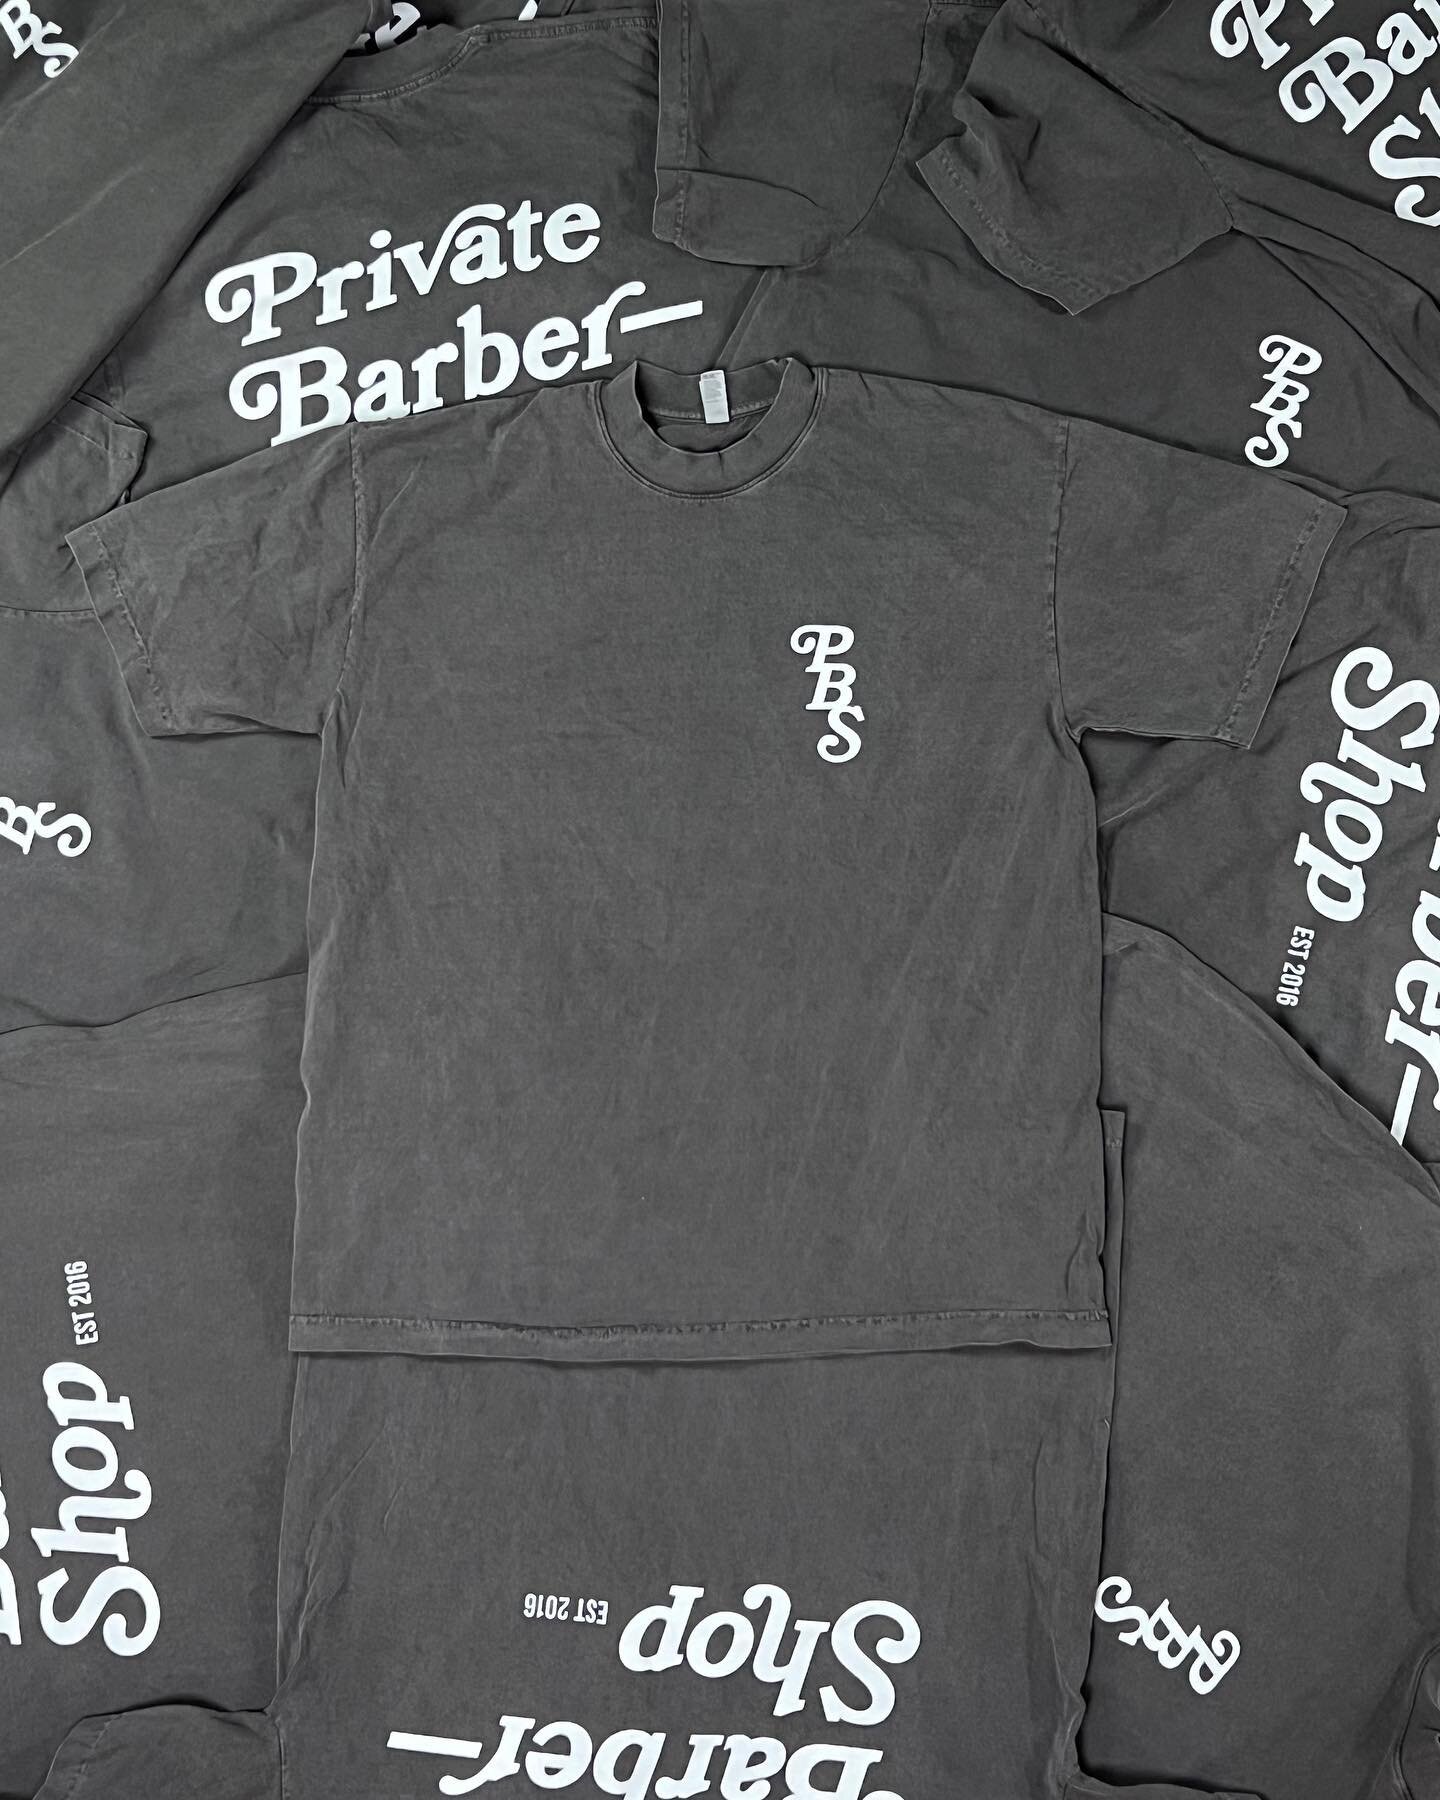 New Private Barbershop tees available online and in-store. 

6.5 ounce heavy cotton, shrink free and garment dyed.